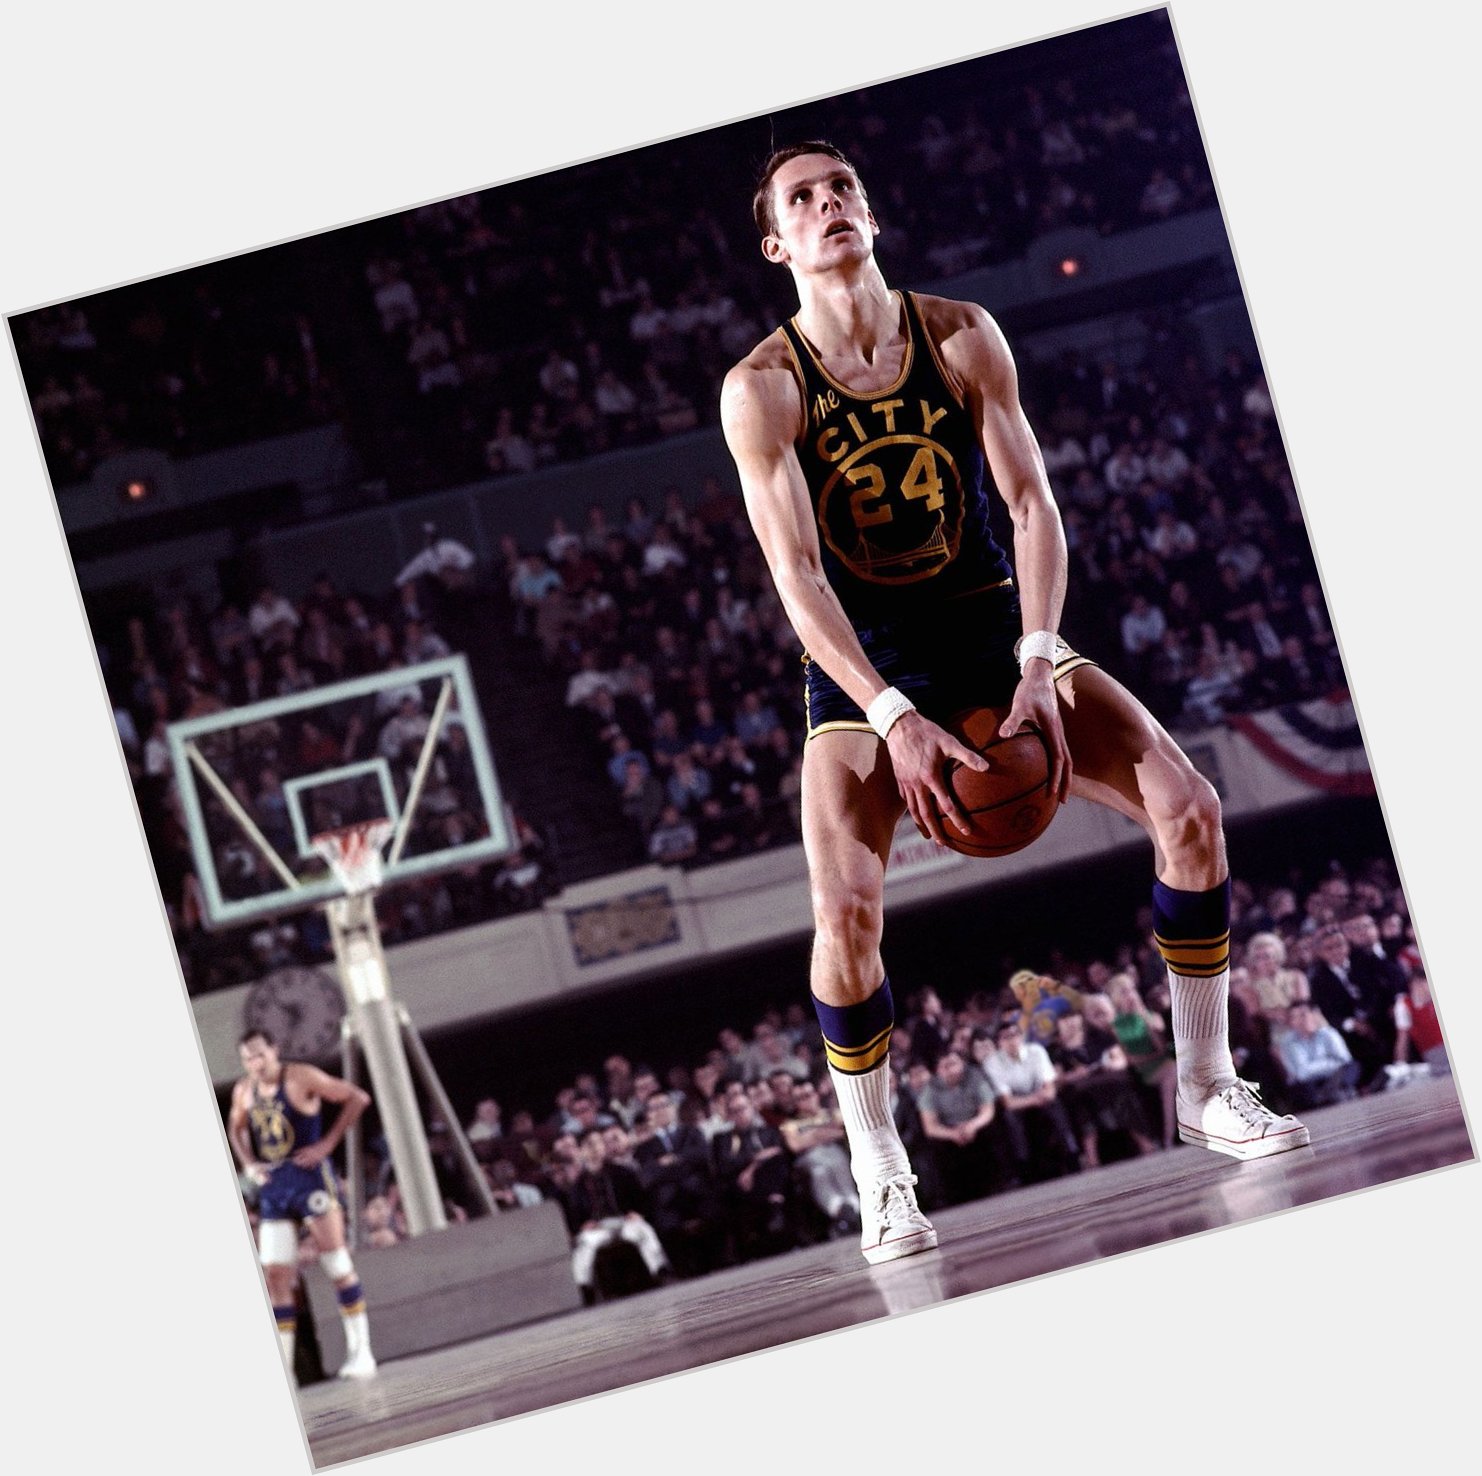 Happy Birthday to Rick Barry, who turns 73 today! 